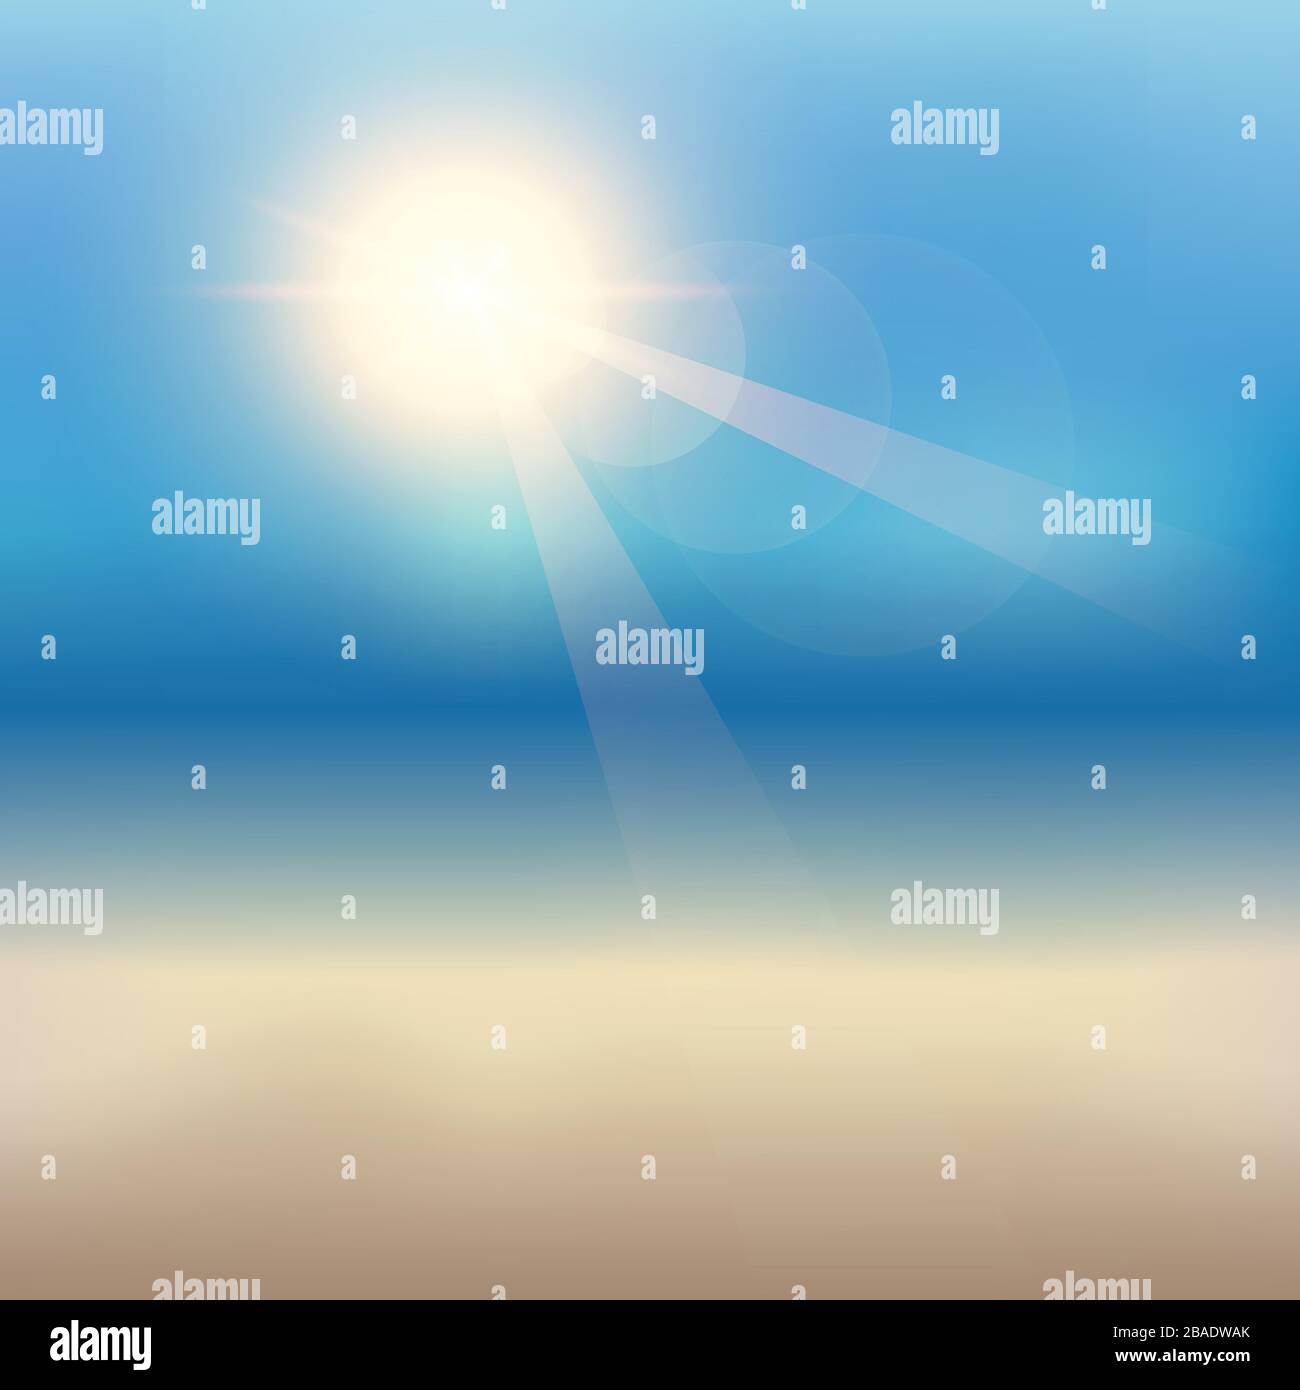 sunny sky on the beach background with copy space vector illustration EPS10 Stock Vector